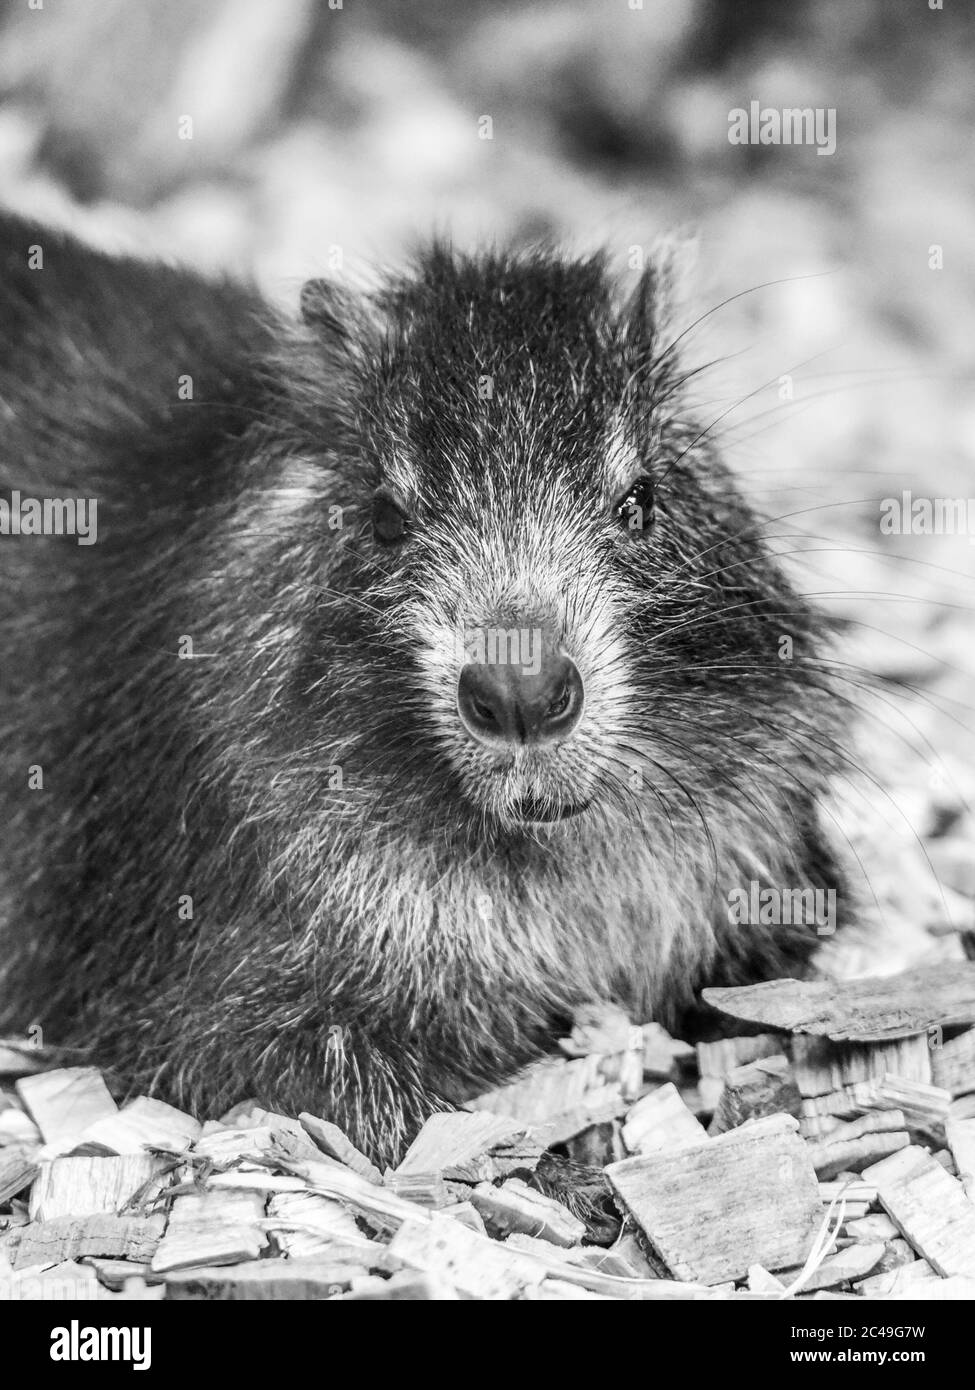 Desmarests hutia or Cuban hutia, Capromys pilorides. Endemic rodent from Cuba, Central America. Black and white image. Stock Photo